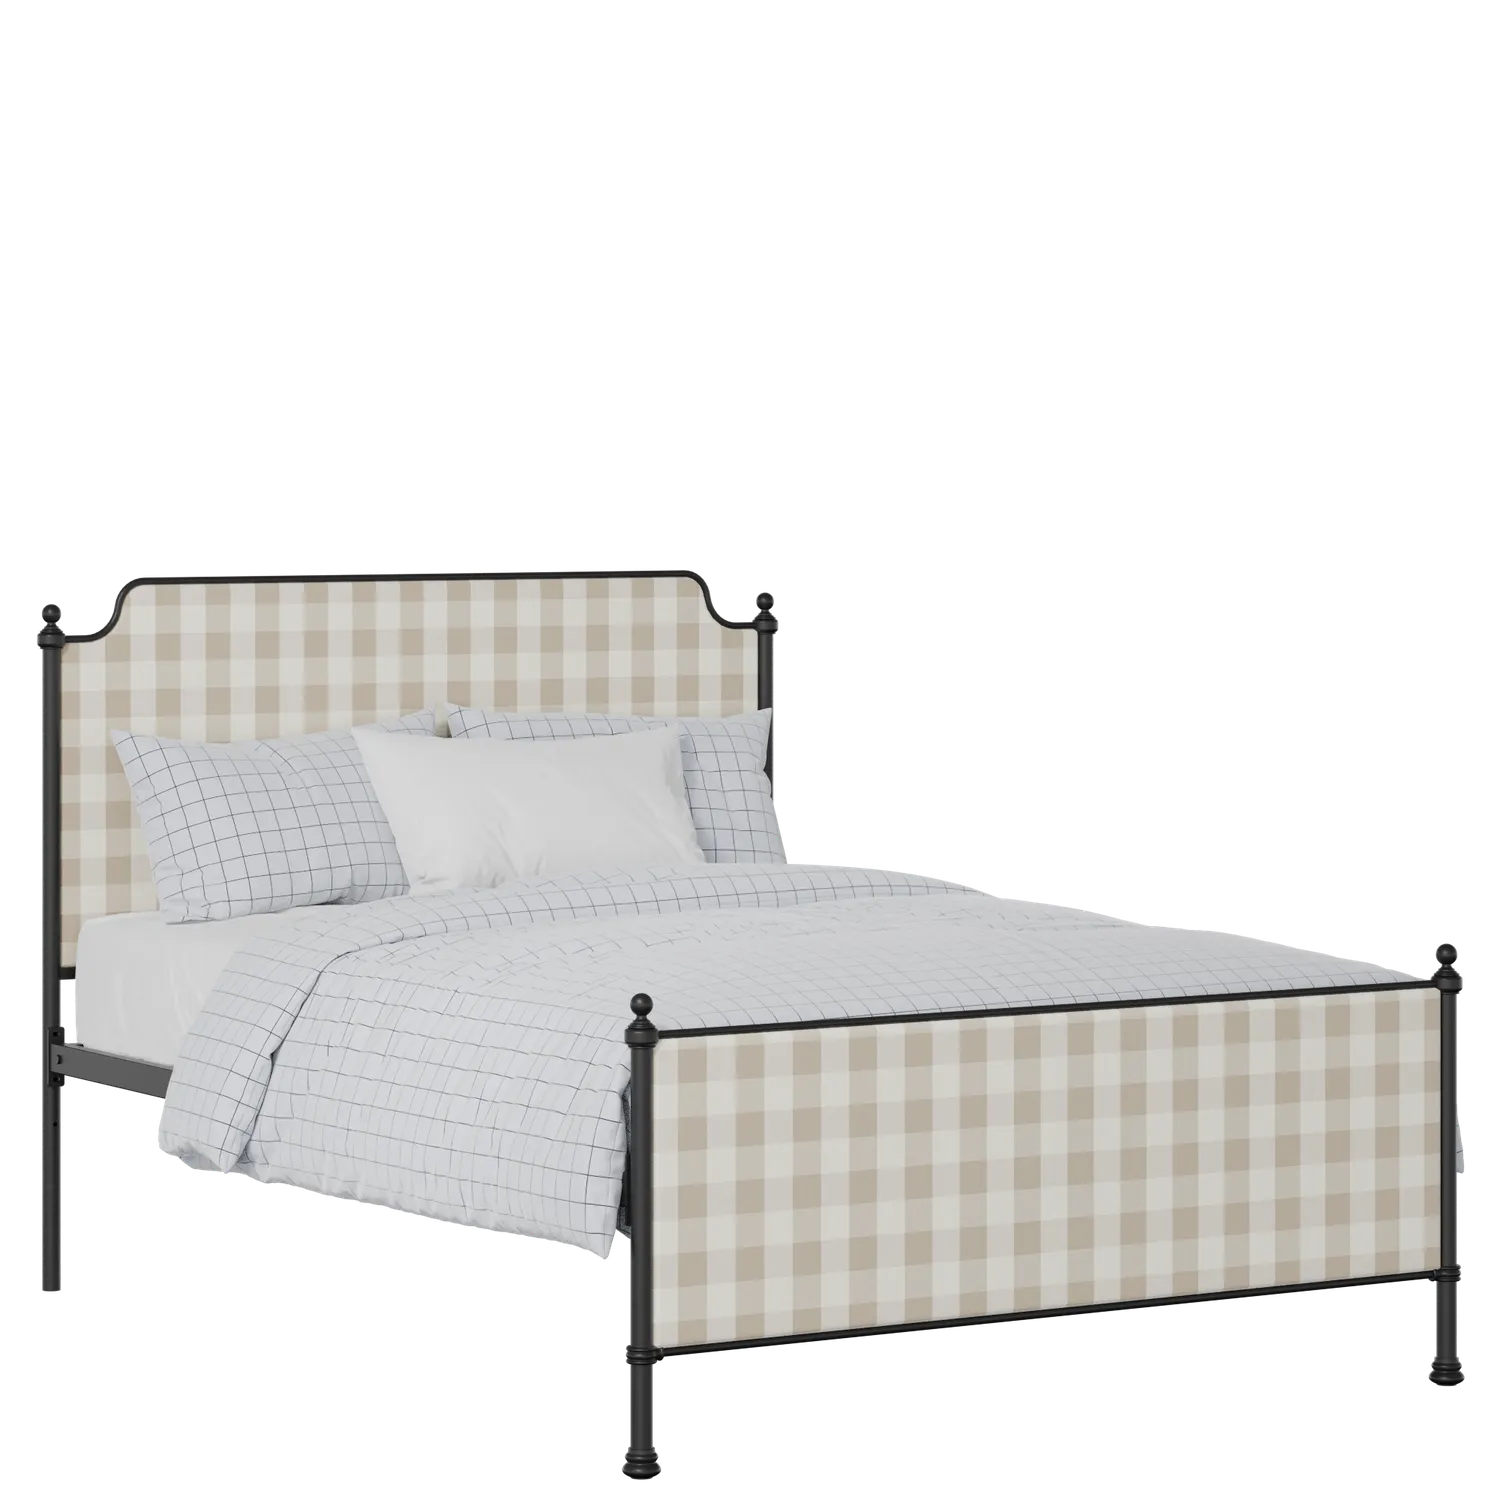 Miranda iron/metal upholstered bed in black with Romo Kemble Putty fabric